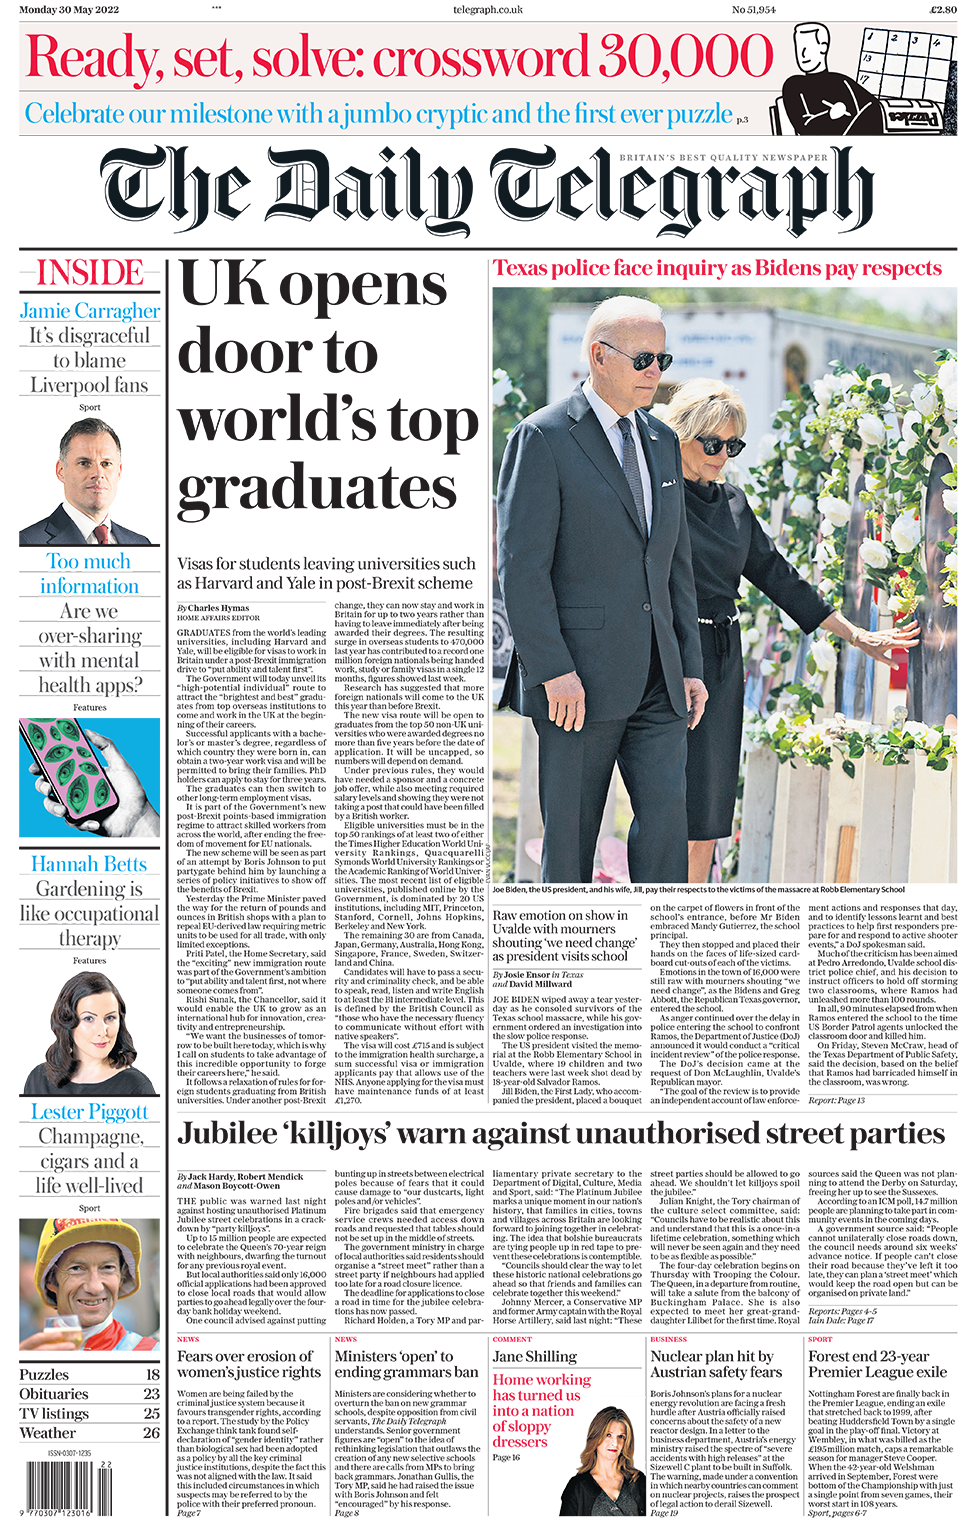 The headline in the Daily Telegraph reads 'UK opens door to world's top graduates'